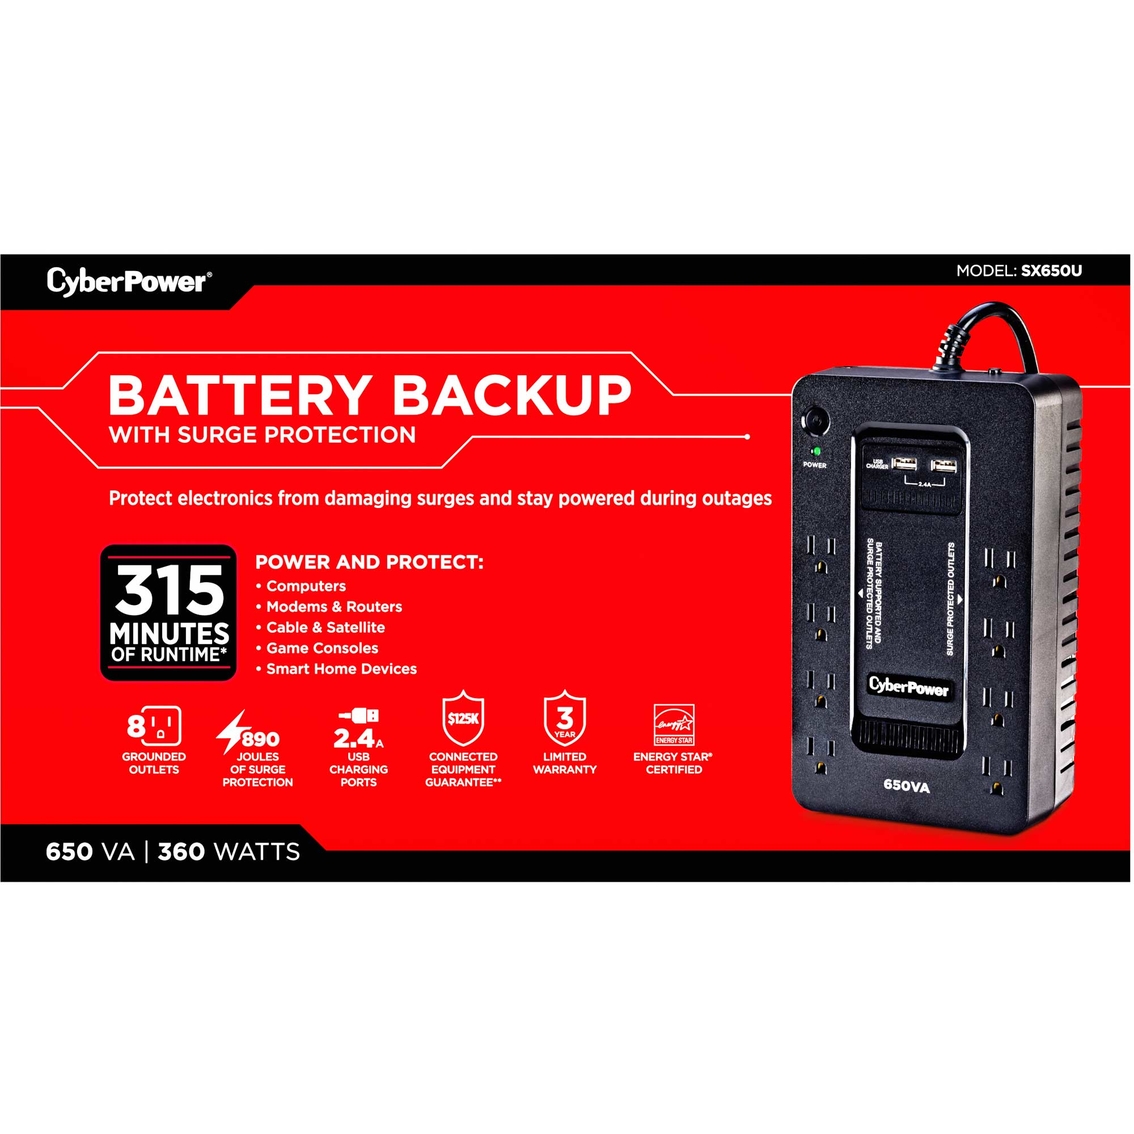 CyberPower 650VA UPS System with 8 Outlets and 2 USB Charging Ports - Image 2 of 7